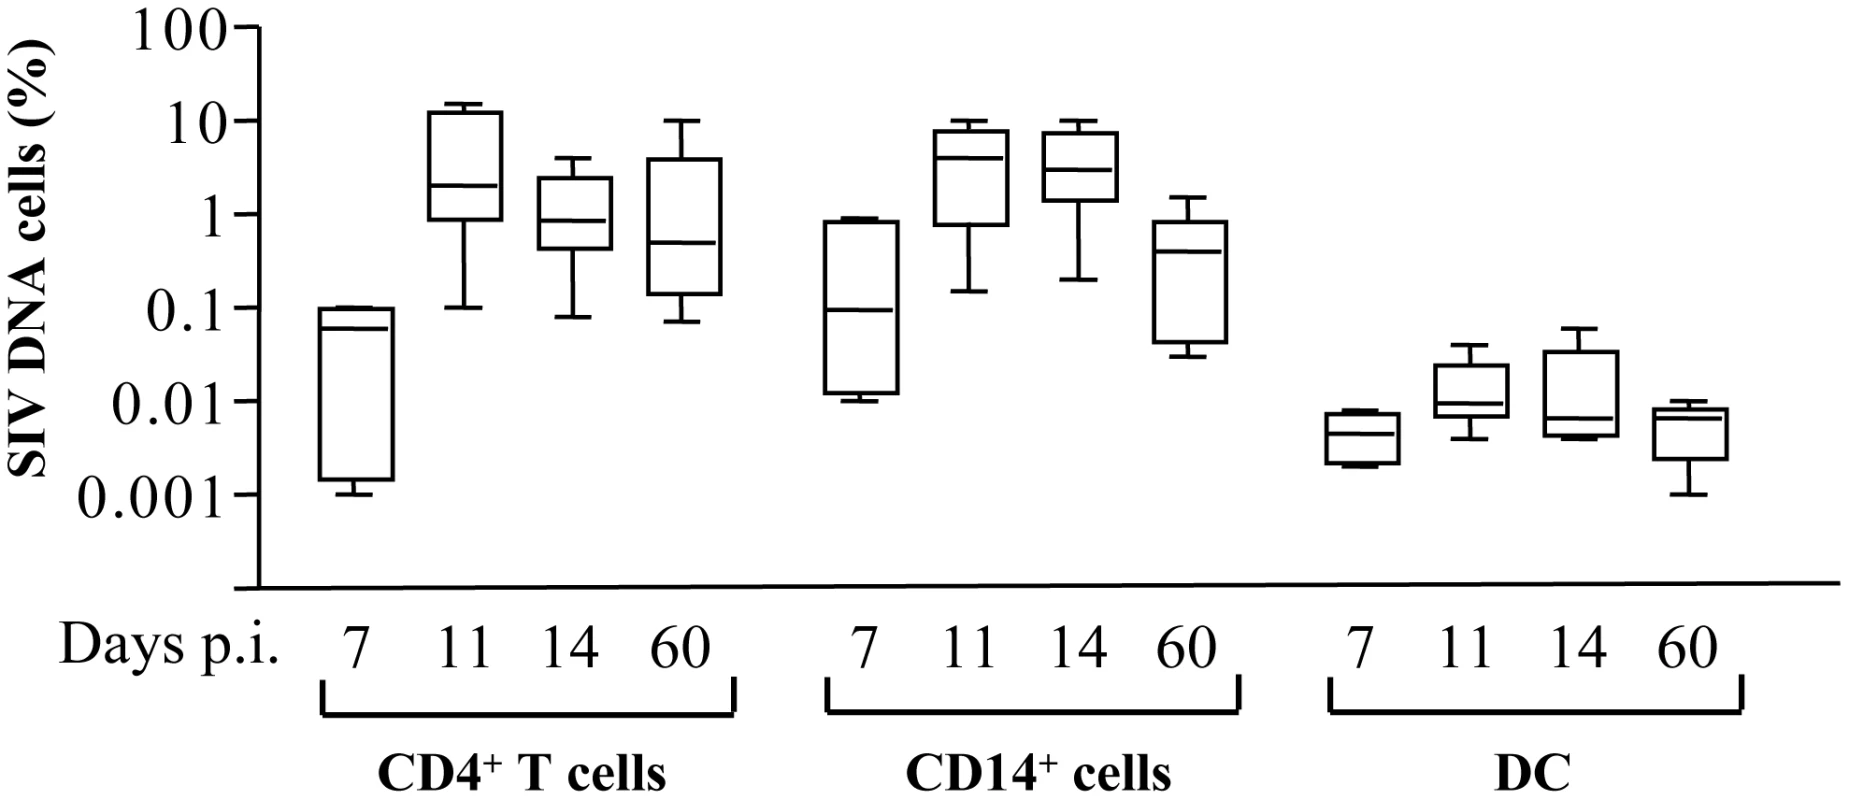 Frequency of SIV-DNA<sup>+</sup> cells in SIV-infected macaques.